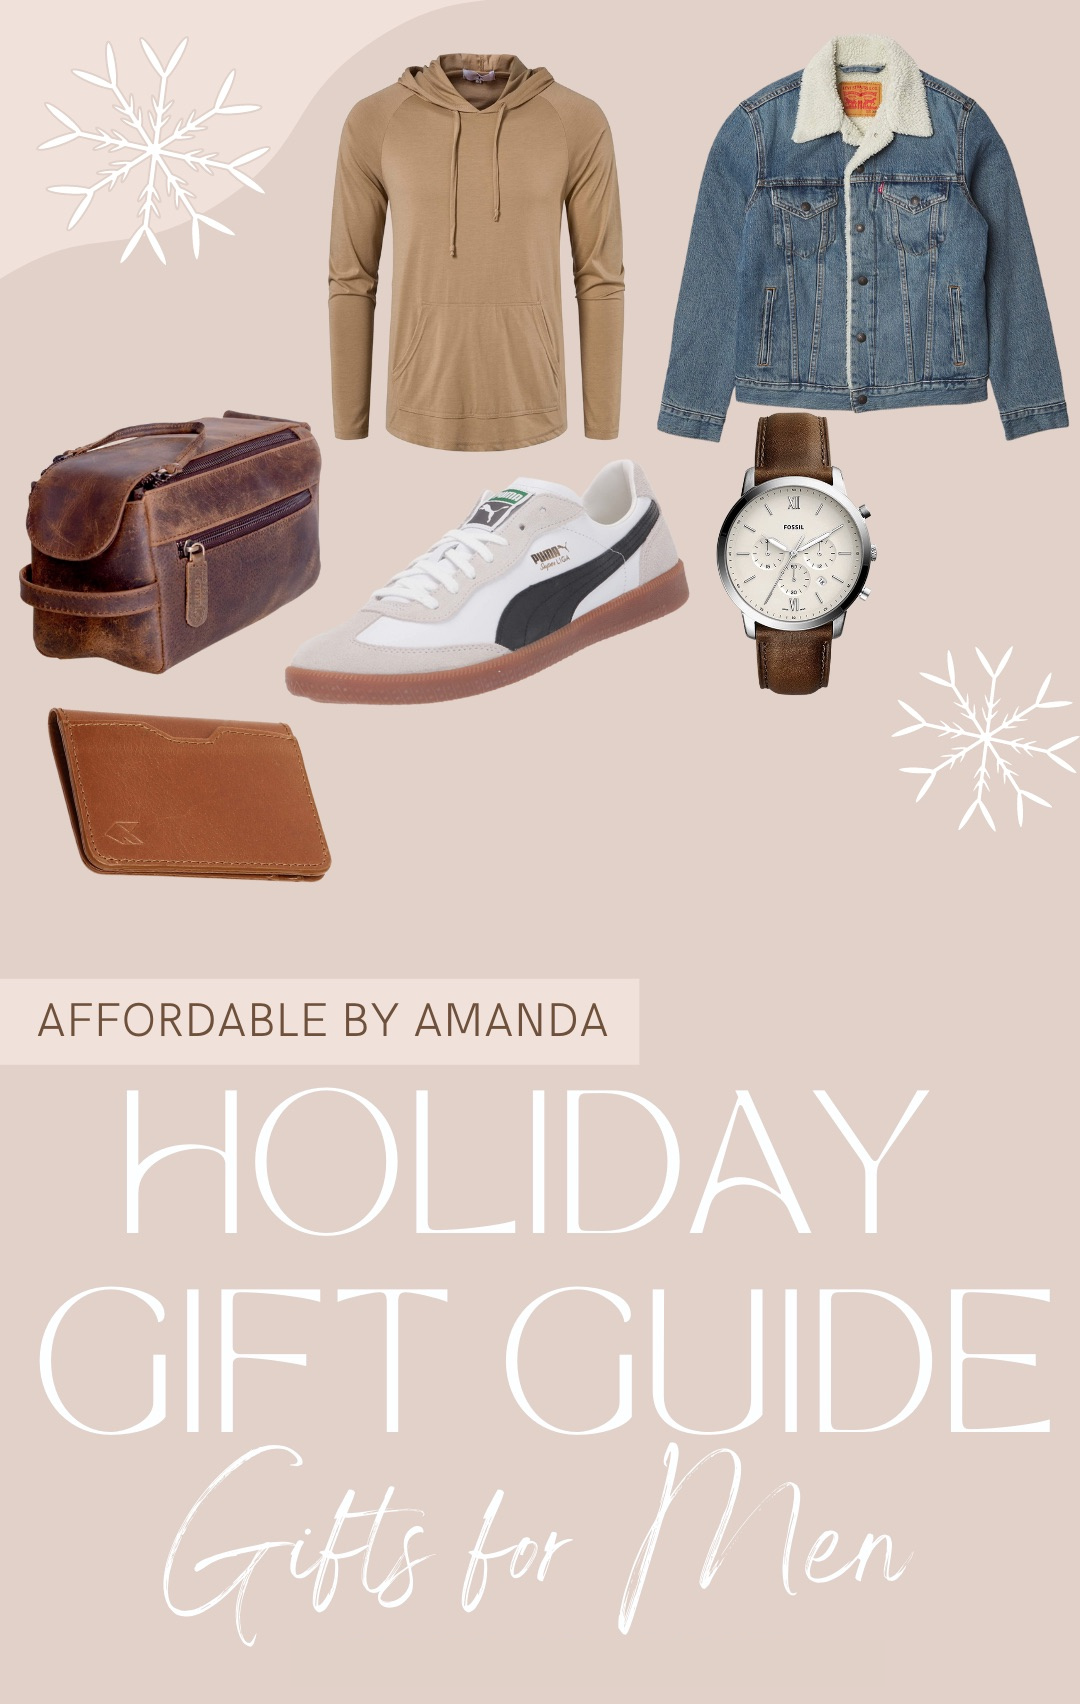 Holiday Gift Guide: Gifts for Men | Affordable by Amanda